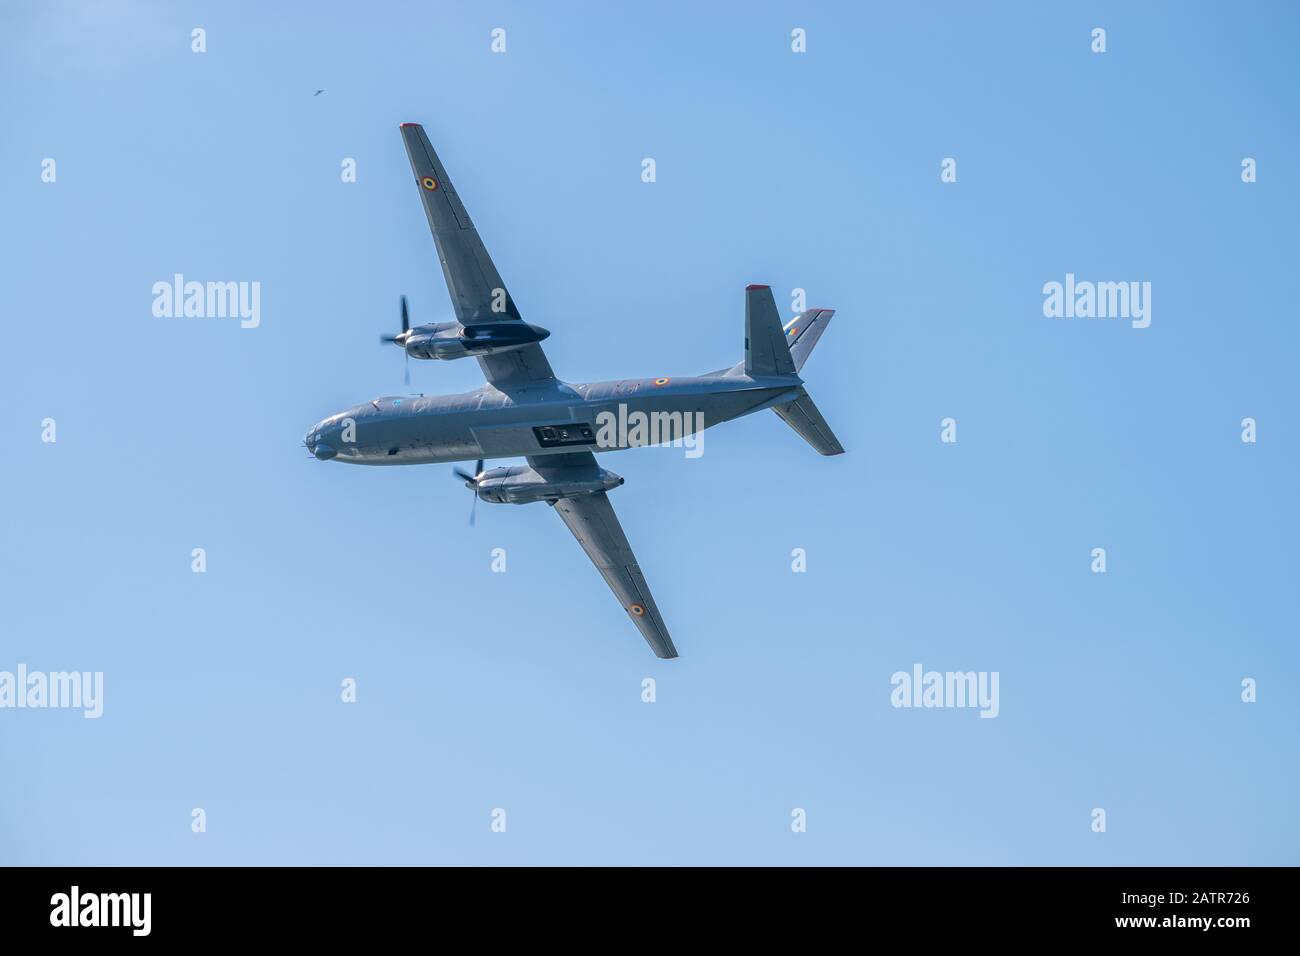 Bucharest/ Romania - AeroNautic Show - September 21, 2019: AN30 military airplane flying in the sky. Stock Photo